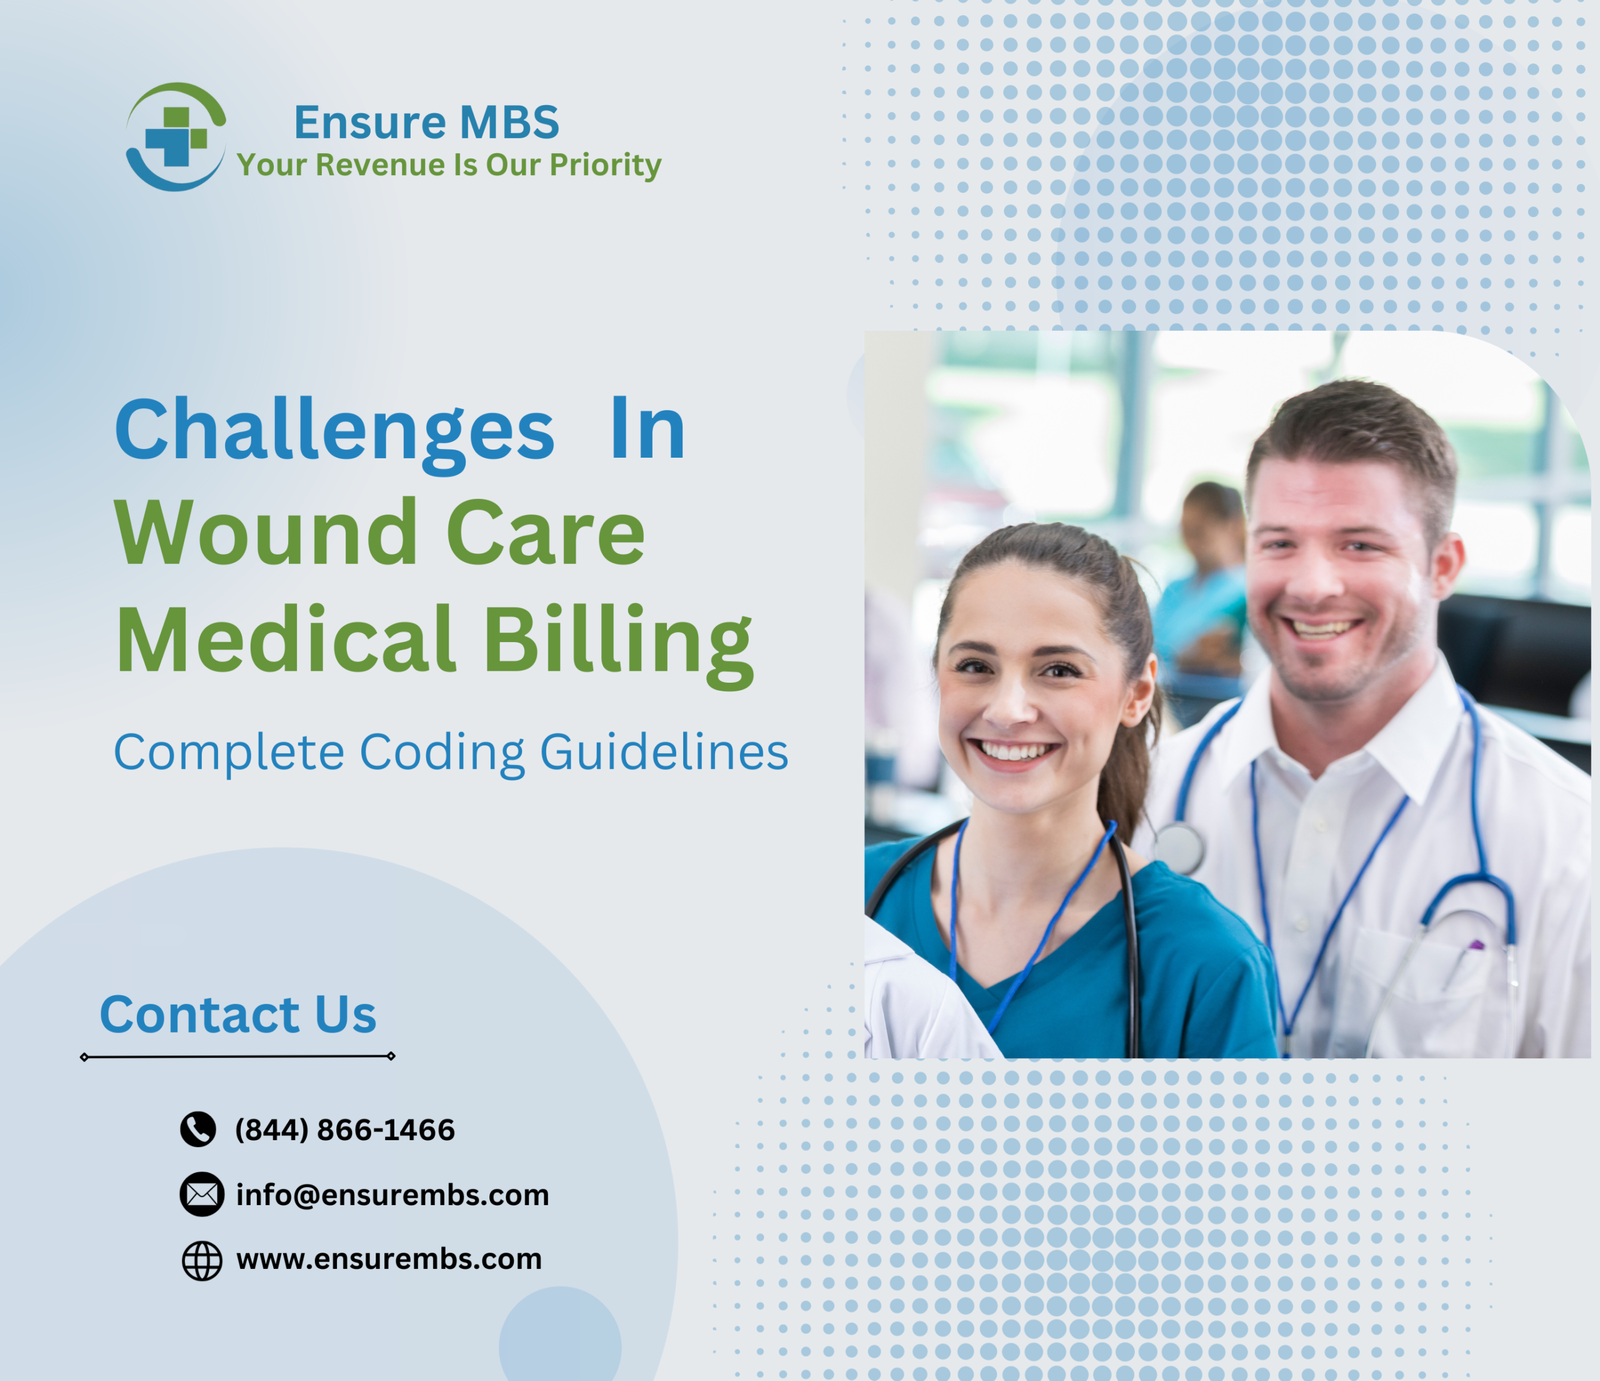 Challenges in Wound Care Medical Billing Complete Coding Guidelines www.ensurembs.com